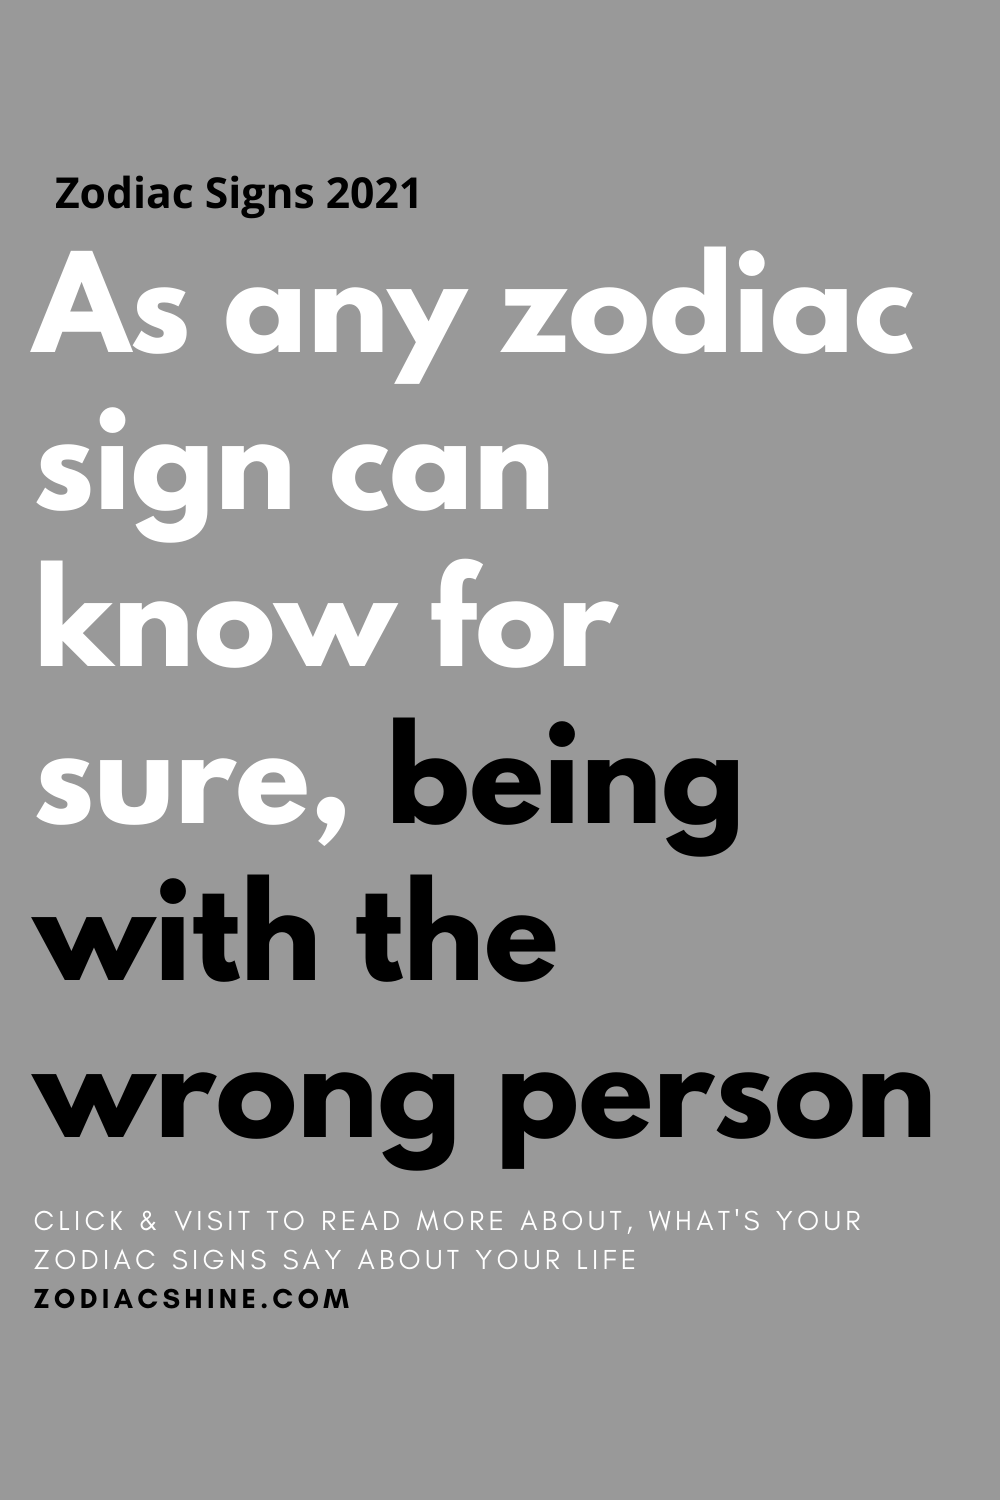 As any zodiac sign can know for sure, being with the wrong person